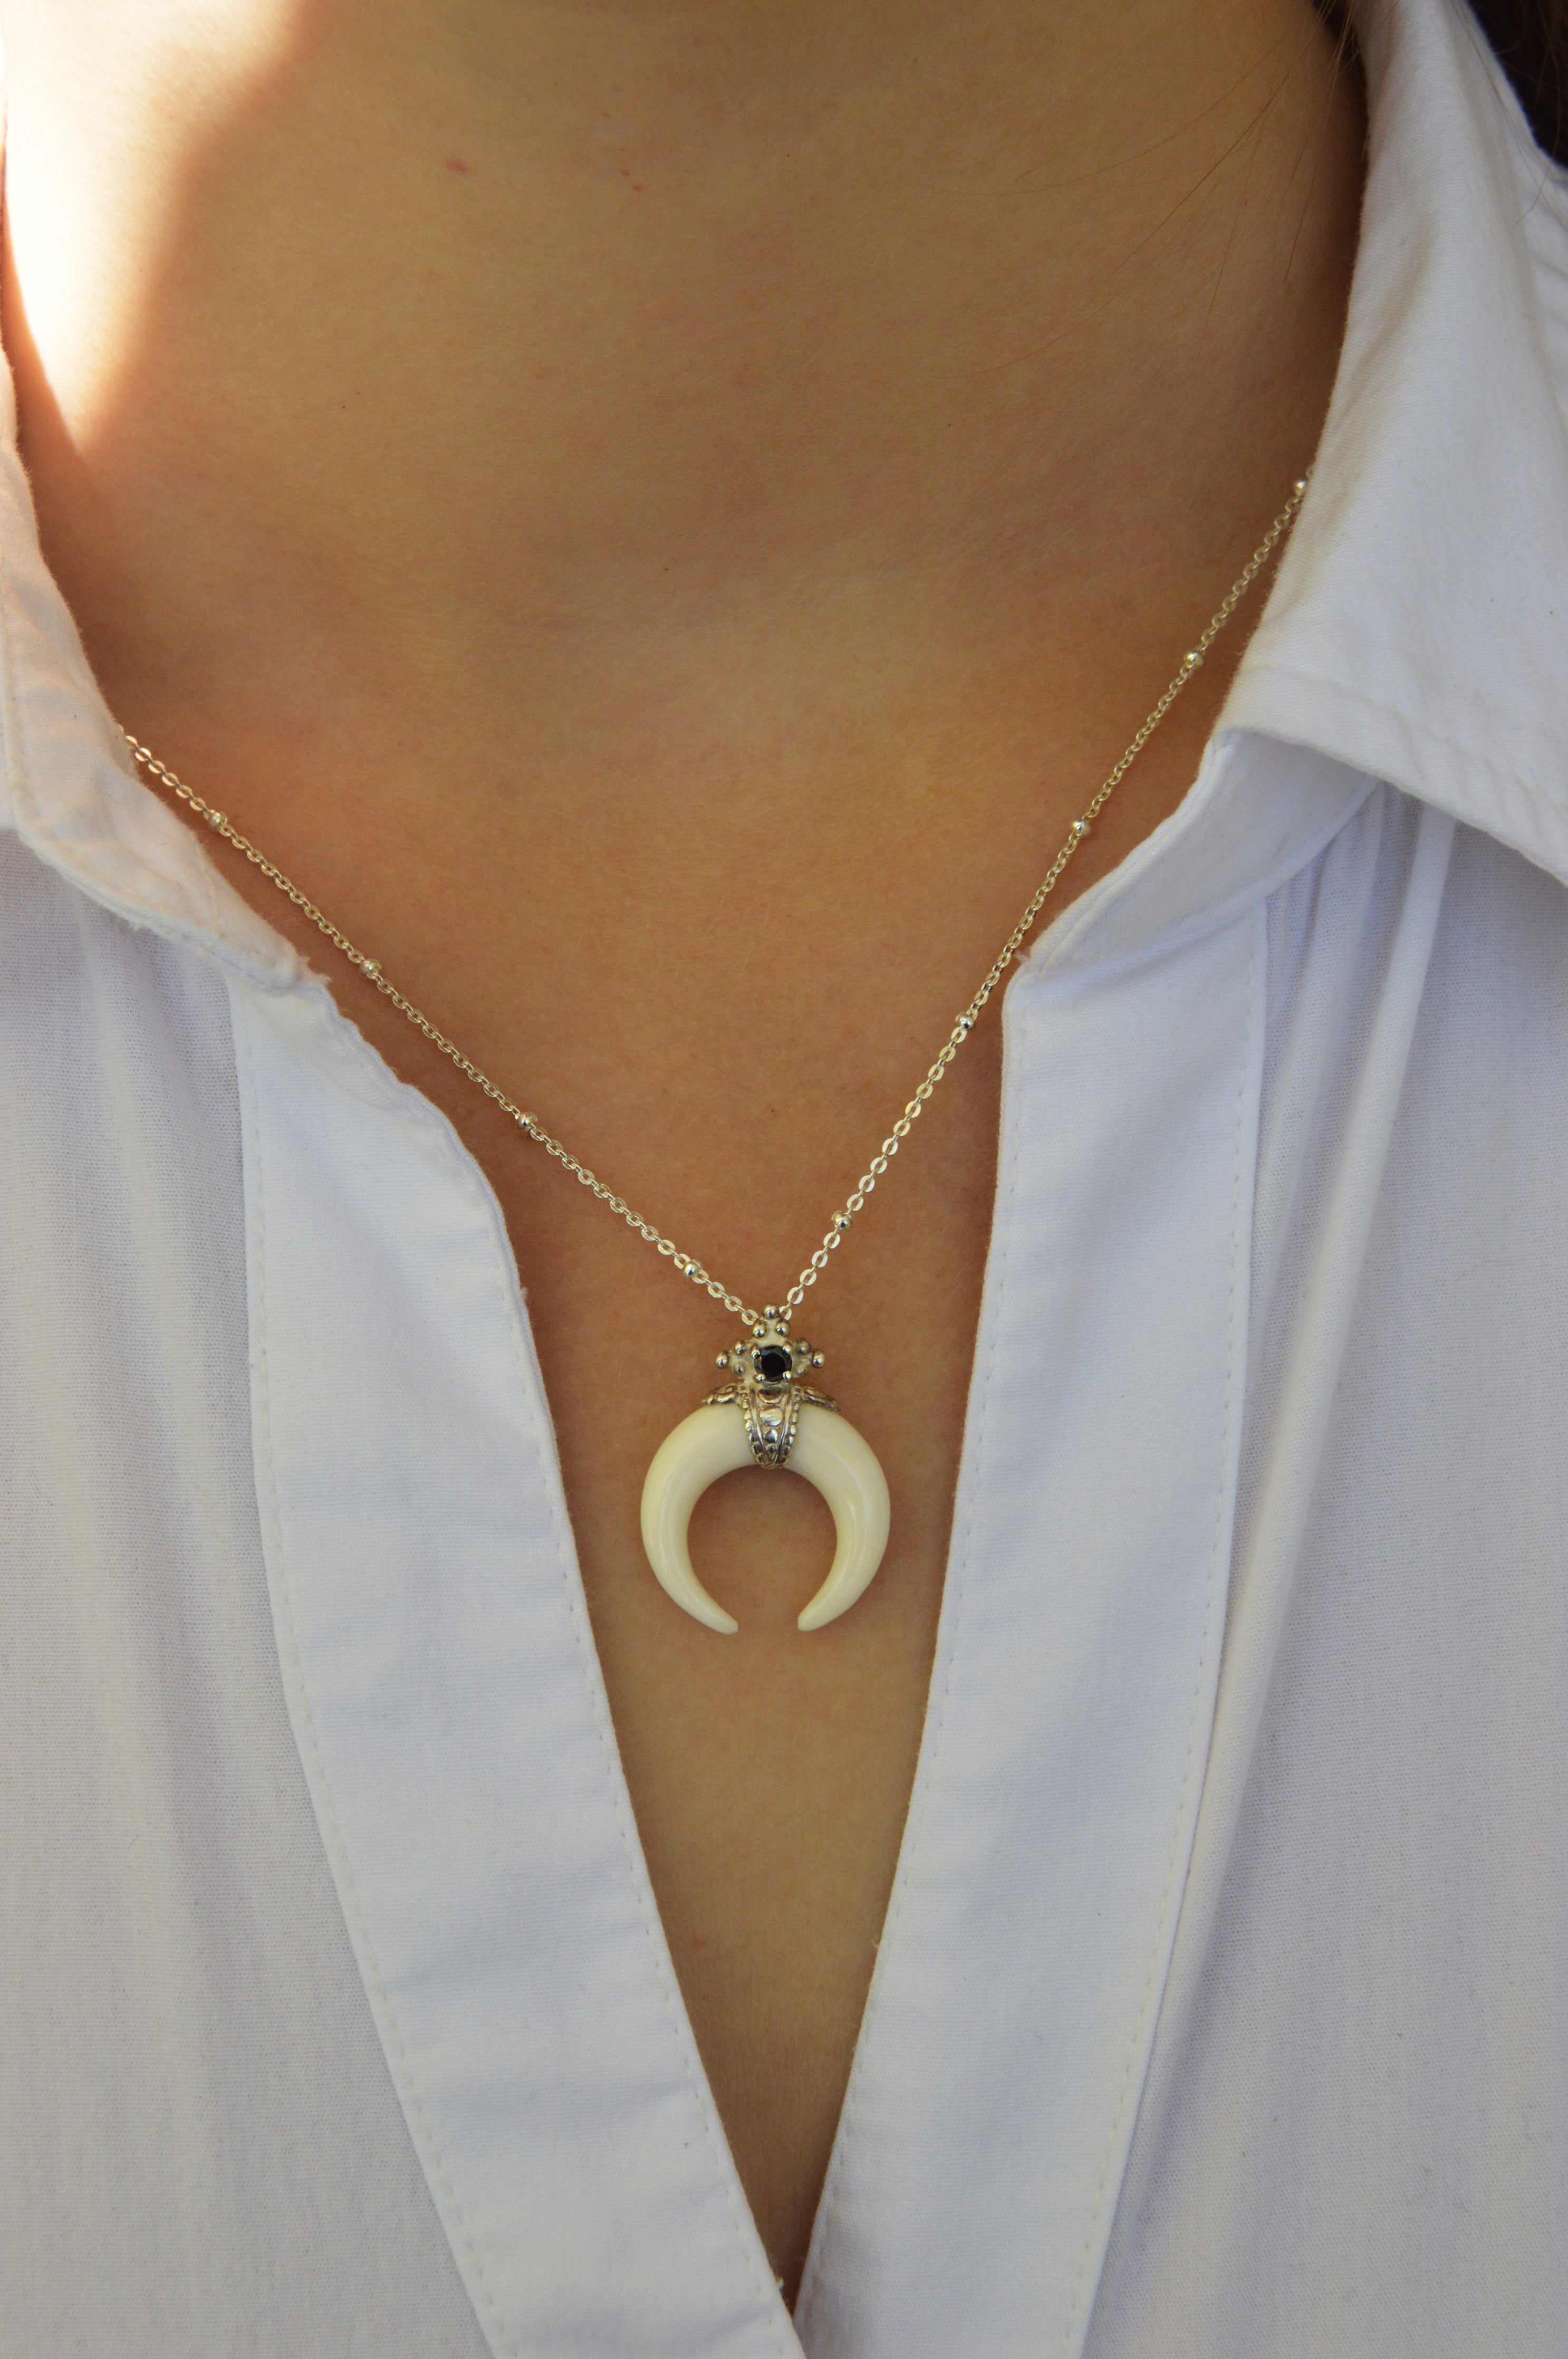 Crescent Moon Horn Necklace